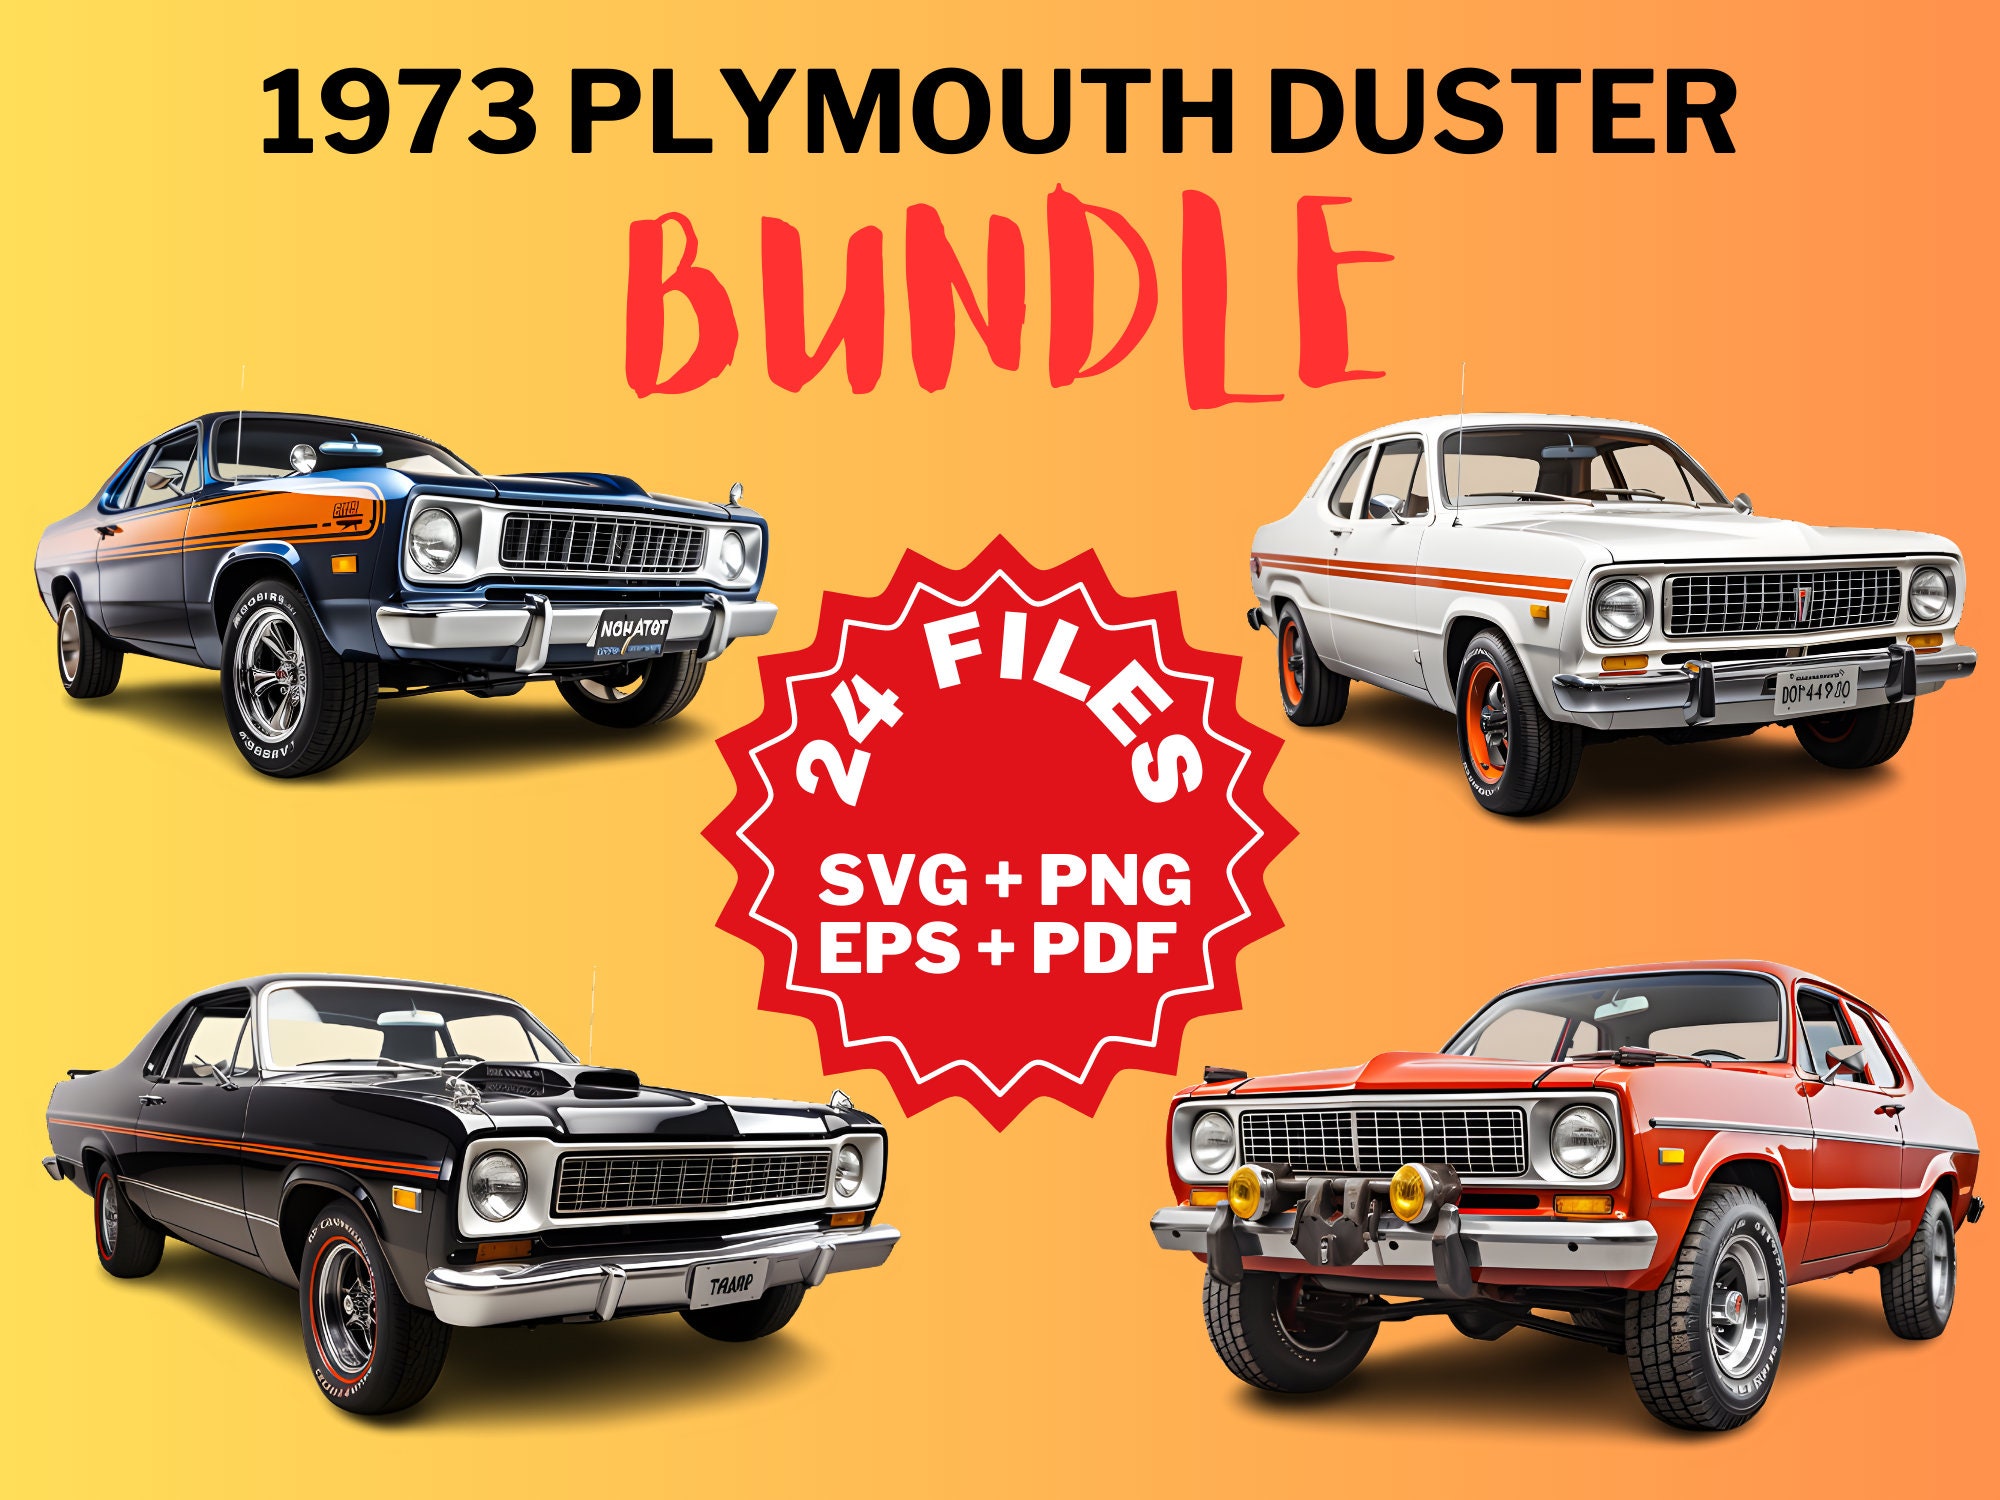 Plymouth Duster Etsy New Zealand